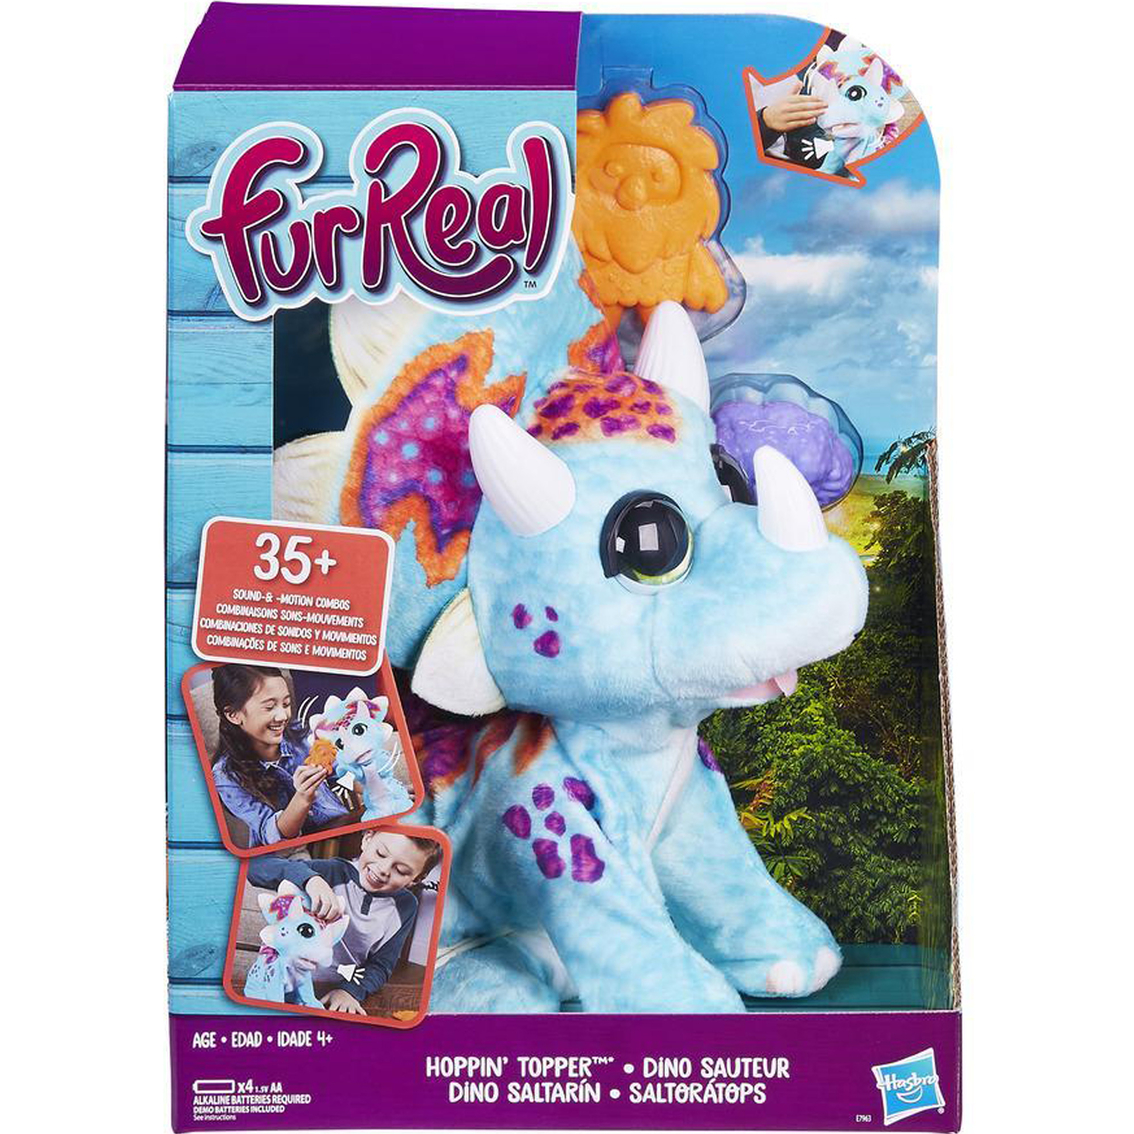 Sound-&-Motion Combination furReal Hoppin’ Topper Interactive Plush Pet Toy 35 